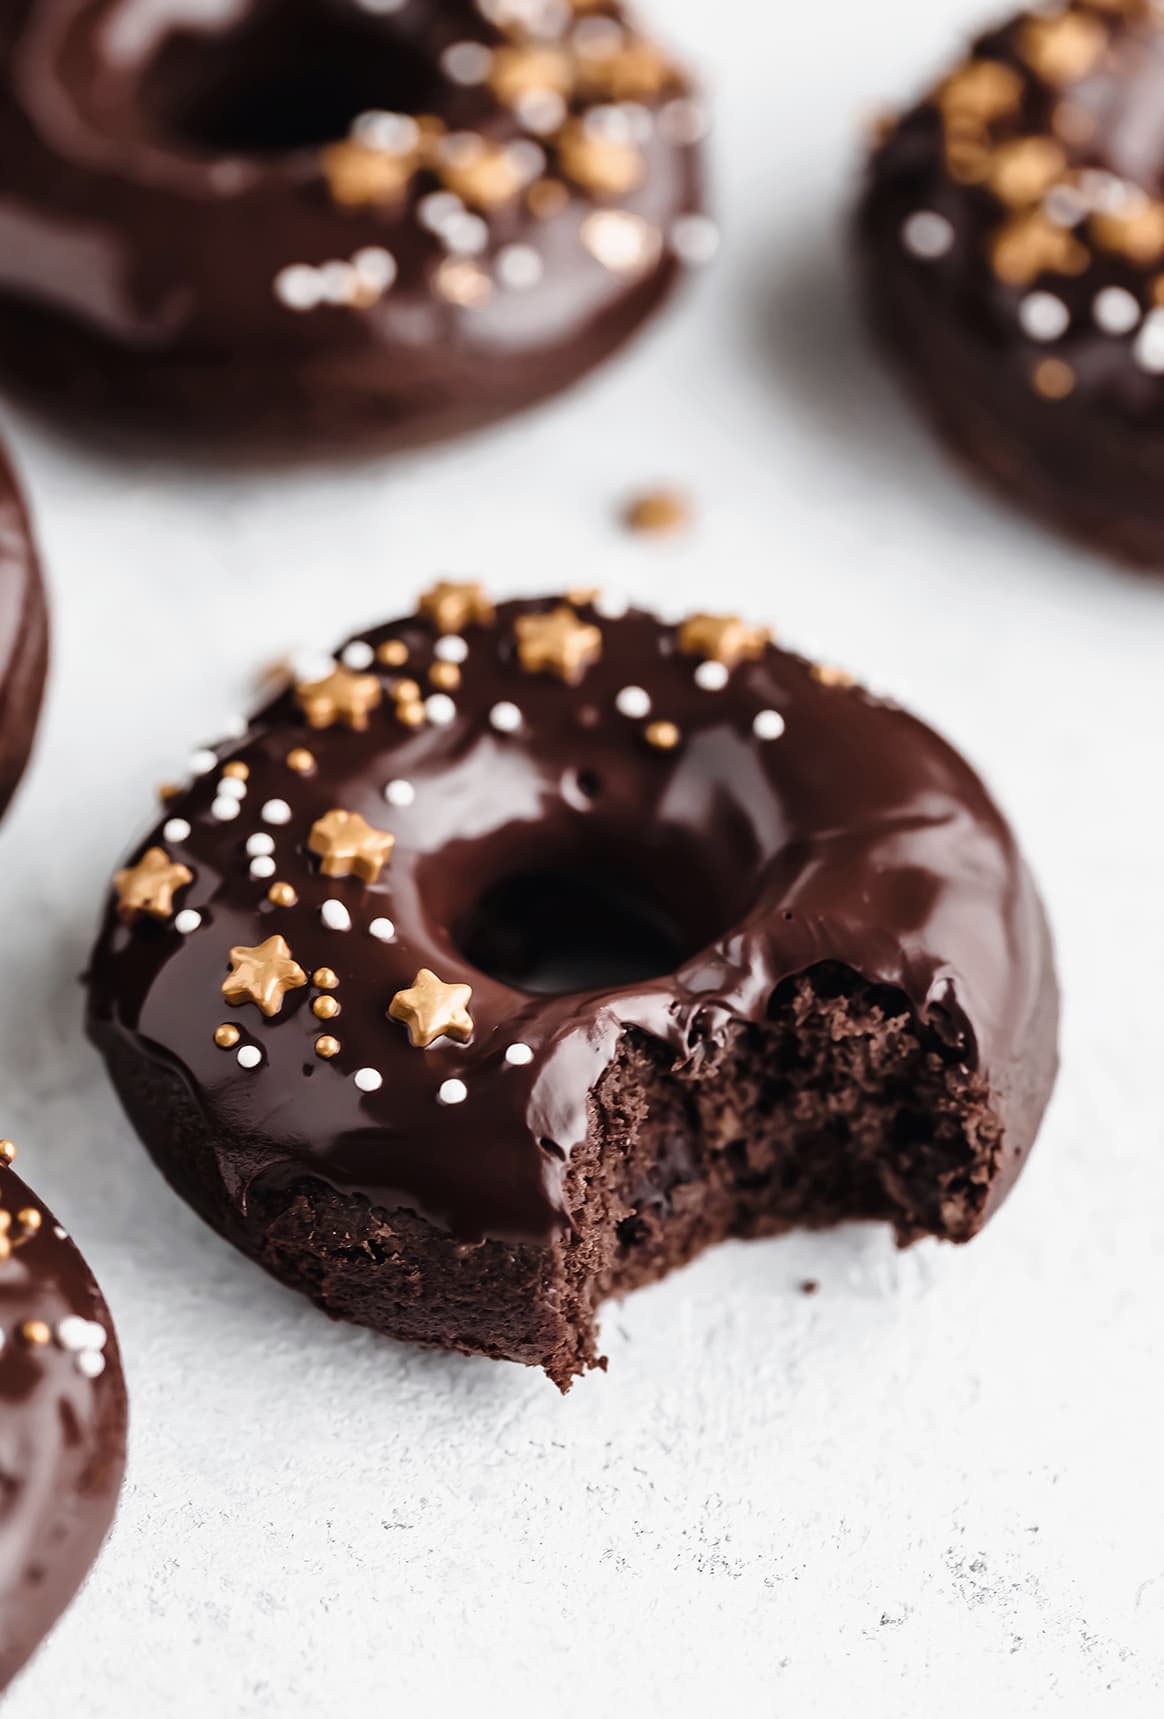 Baked Chocolate Donuts with Chocolate Ganache Glaze - Happiness is